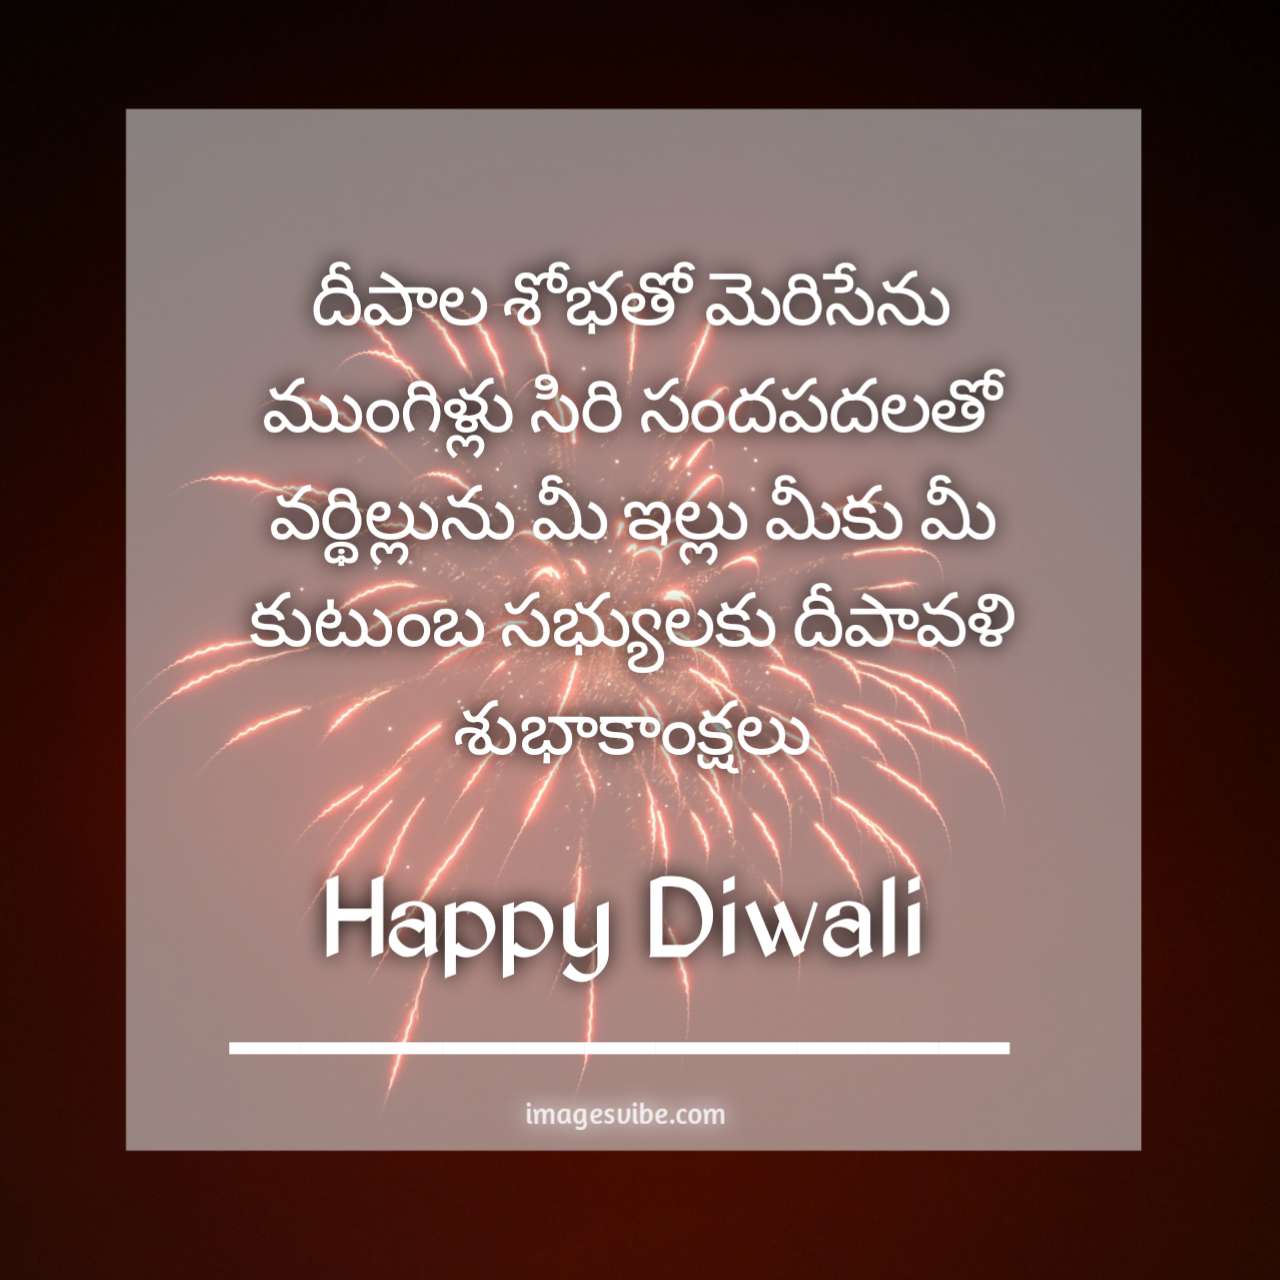 Best 30+ Happy Diwali Images With Quotes In Telugu & Wishes in ...